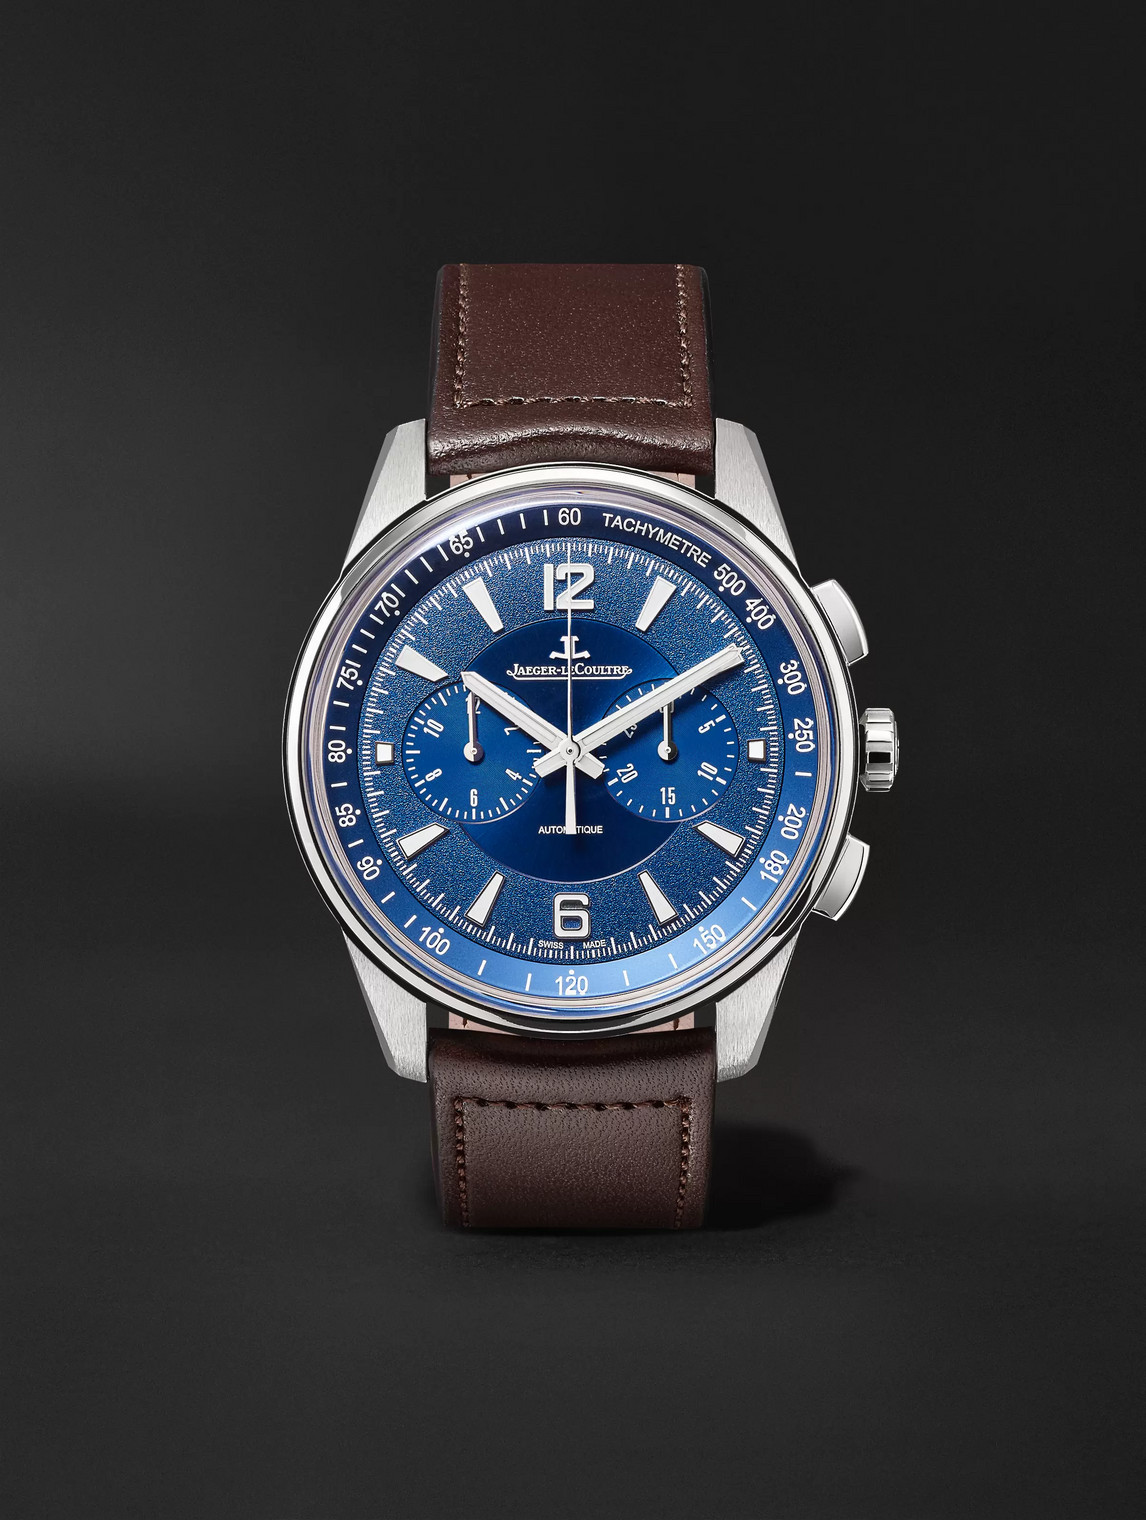 JAEGER-LECOULTRE POLARIS CHRONOGRAPH 42MM STAINLESS STEEL AND LEATHER WATCH, REF. NO. 9028480